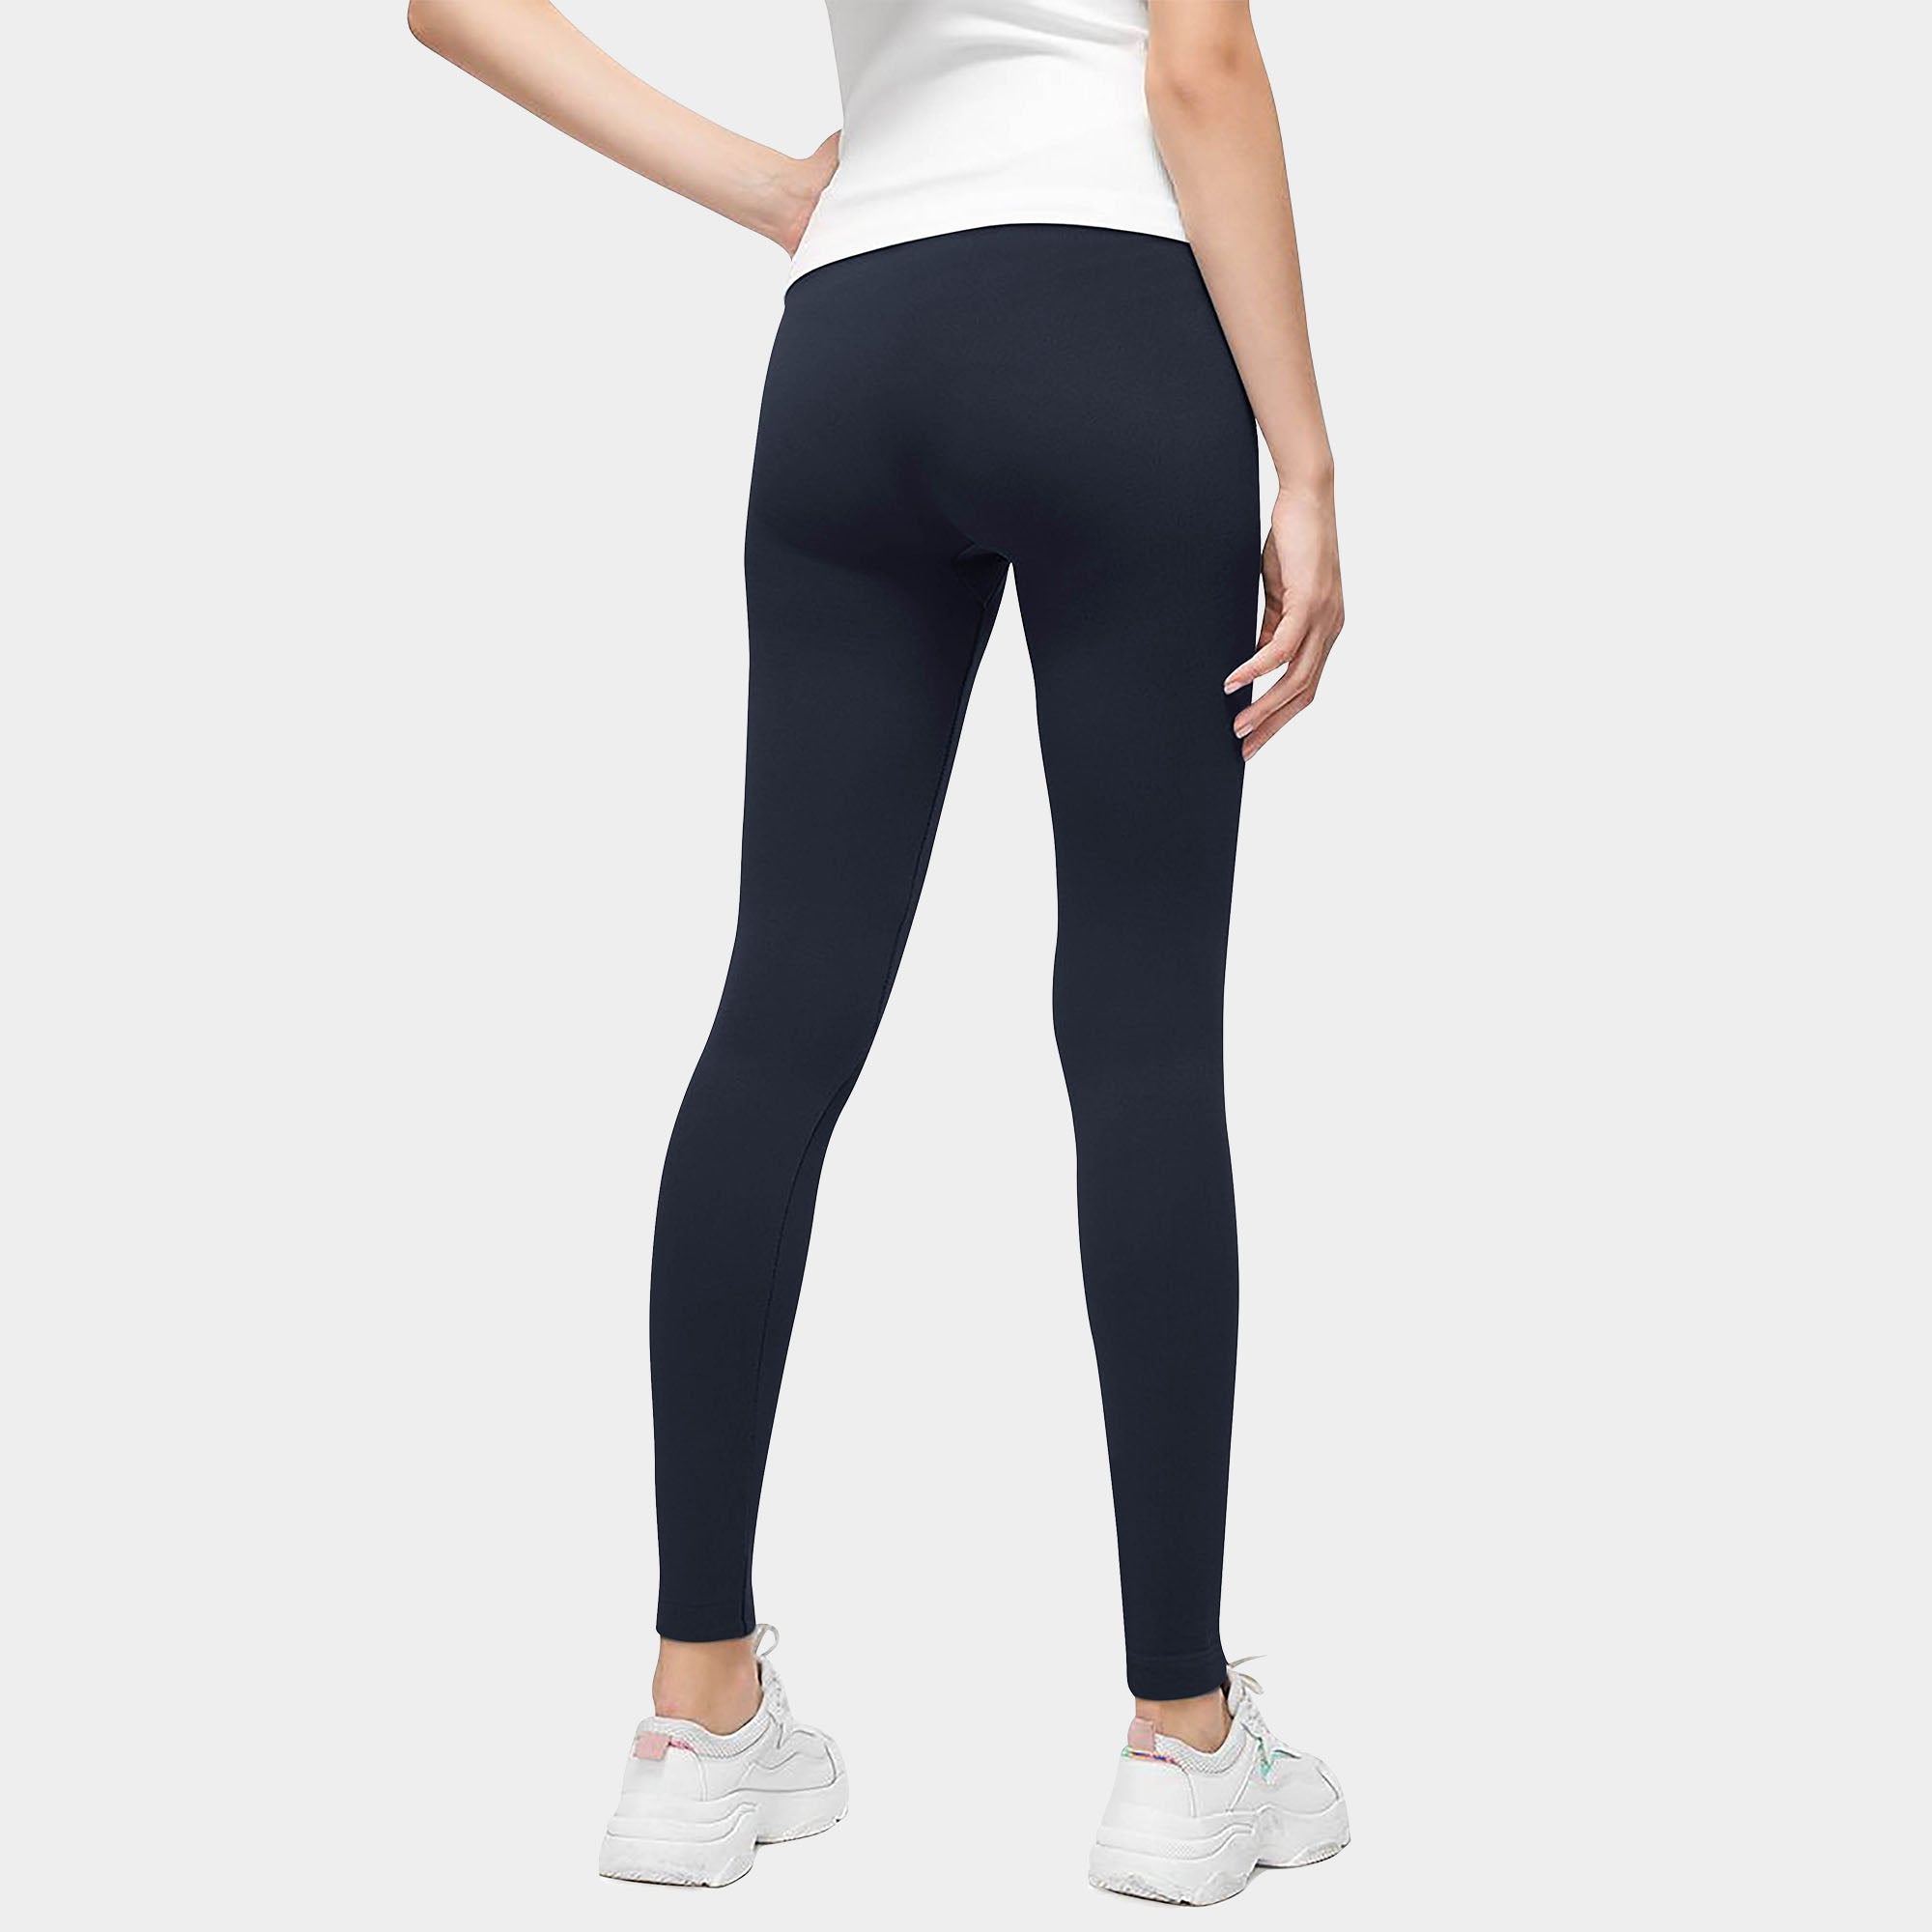 high_waist_inner_soft_lined_waistband_lightweight_yoga_thermal_cozy_comfortable_fashionable_pants_leggins_leggings_spanx_leather_ballet_pilates_polainas_de_las_mujeres_workout_compression_wrinkle_resistant_treggings_best_sexy_jegging_women_girl_girls_womens_spandex_running_winter_squat_thick_cheap_anti_cellulite_pants_sweatpant_sweatpants_ladies_Navy